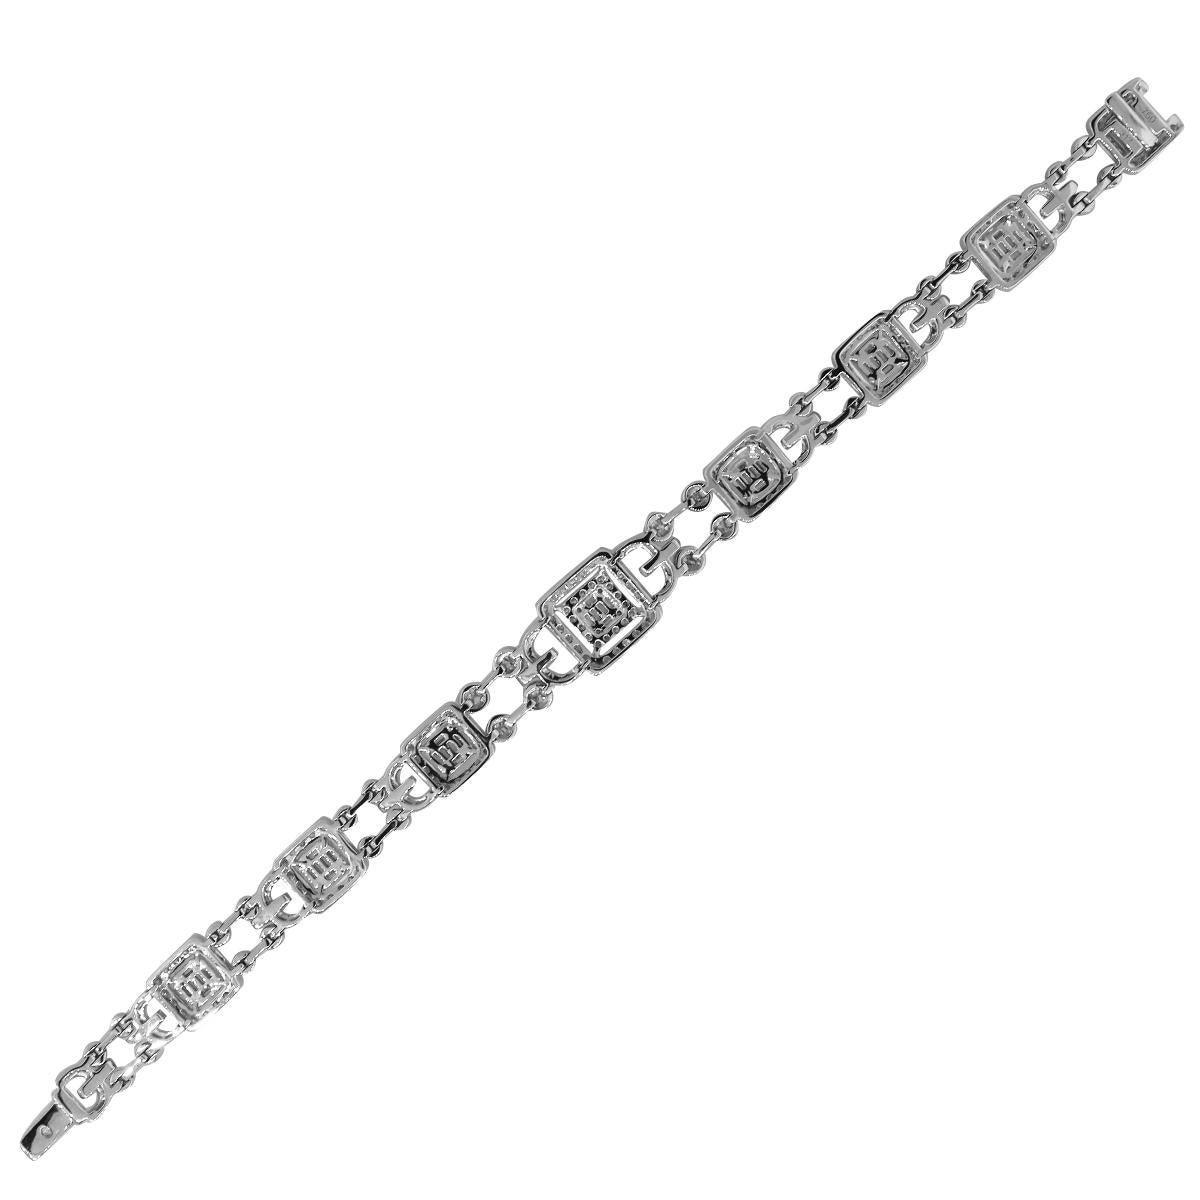 Material: 18k White Gold
Diamond Details: Approximately 3.52ctw of round brilliant diamonds and approximately 0.95ctw baguette cut diamonds. Diamonds are G/H in color and VS in clarity
Wrist size: Will fit up to a 7″ wrist
Measurements: 0.48″ in